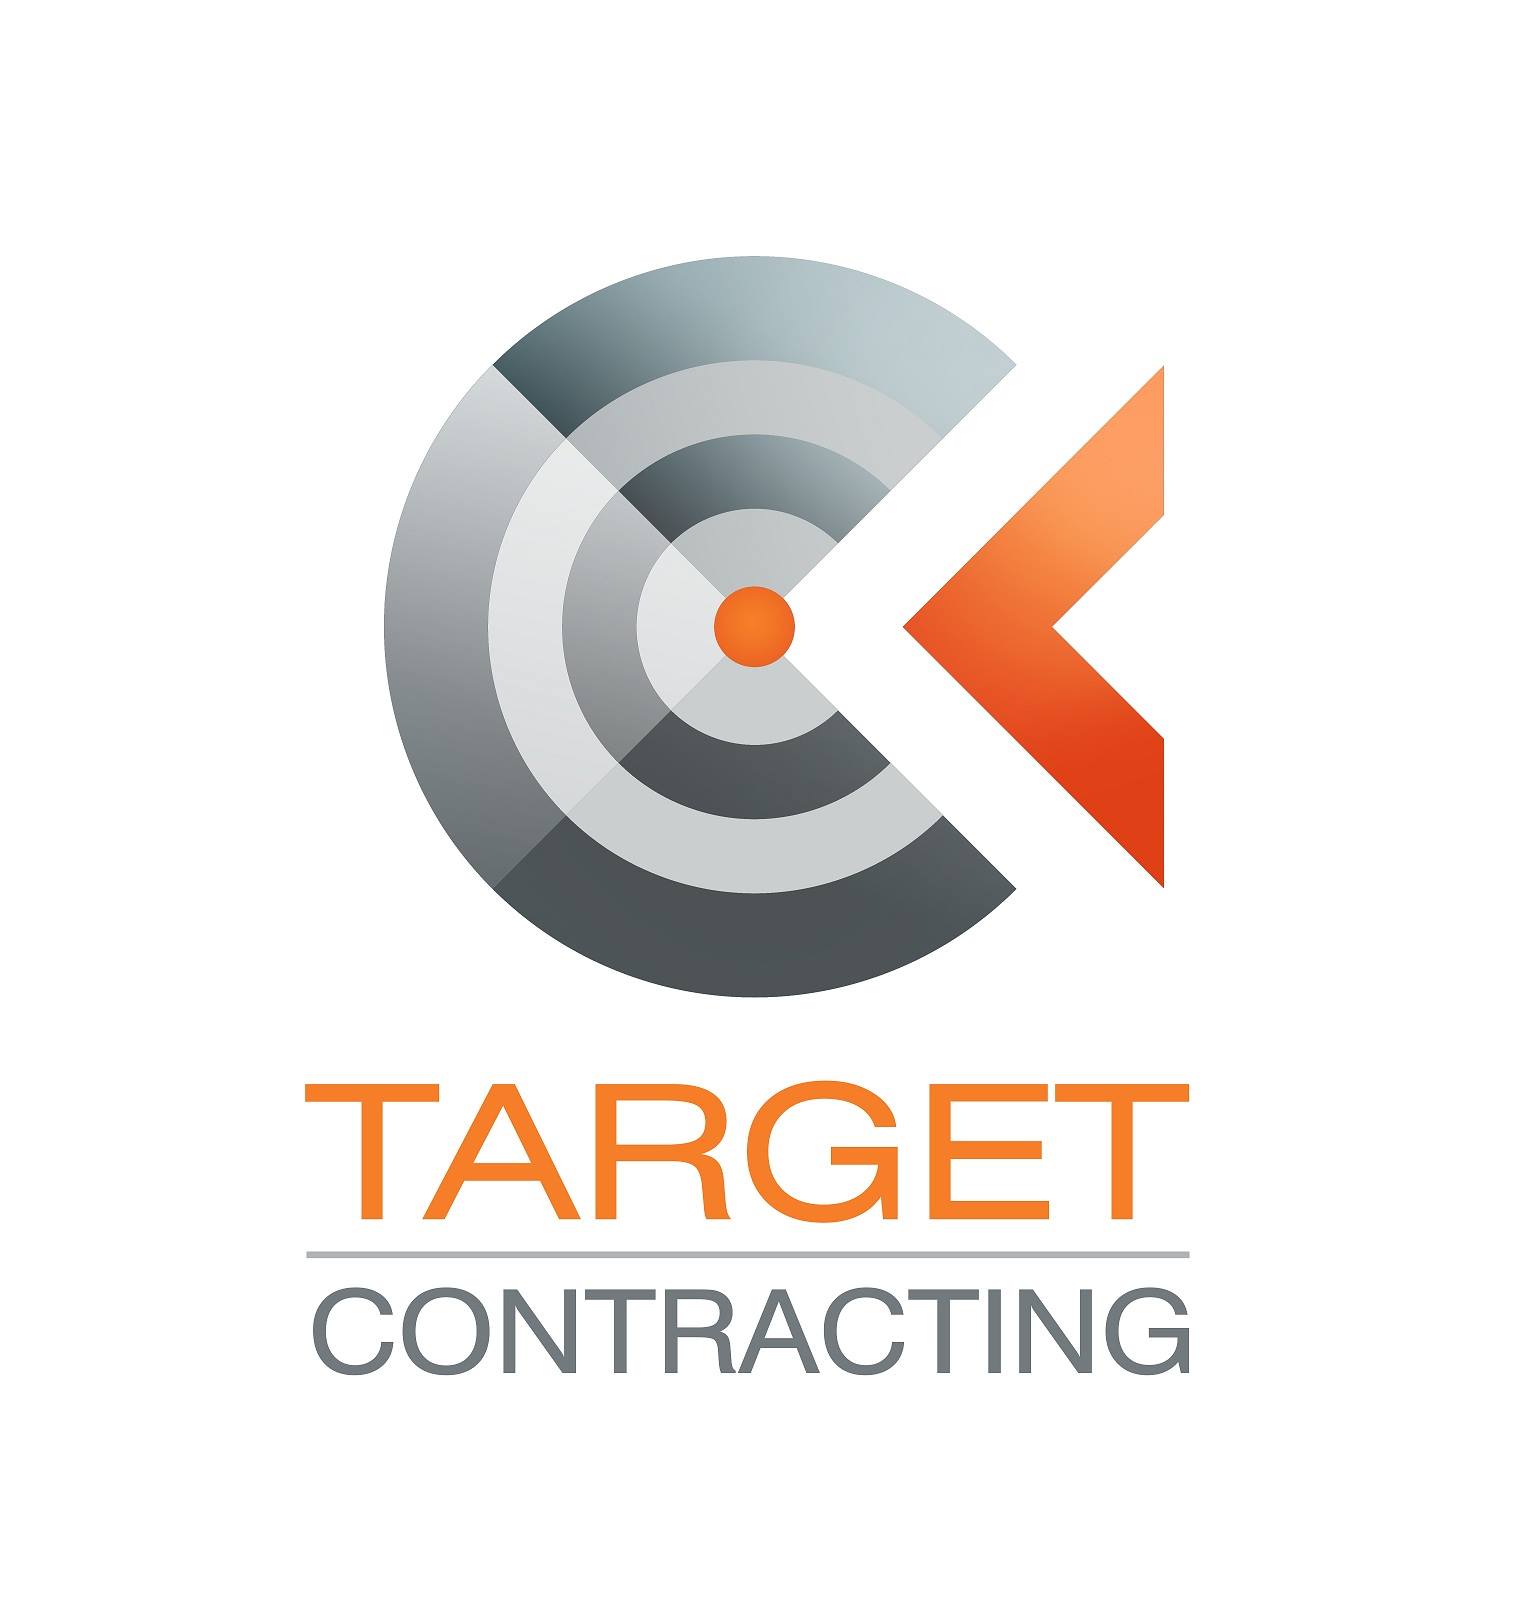 Target Contracting